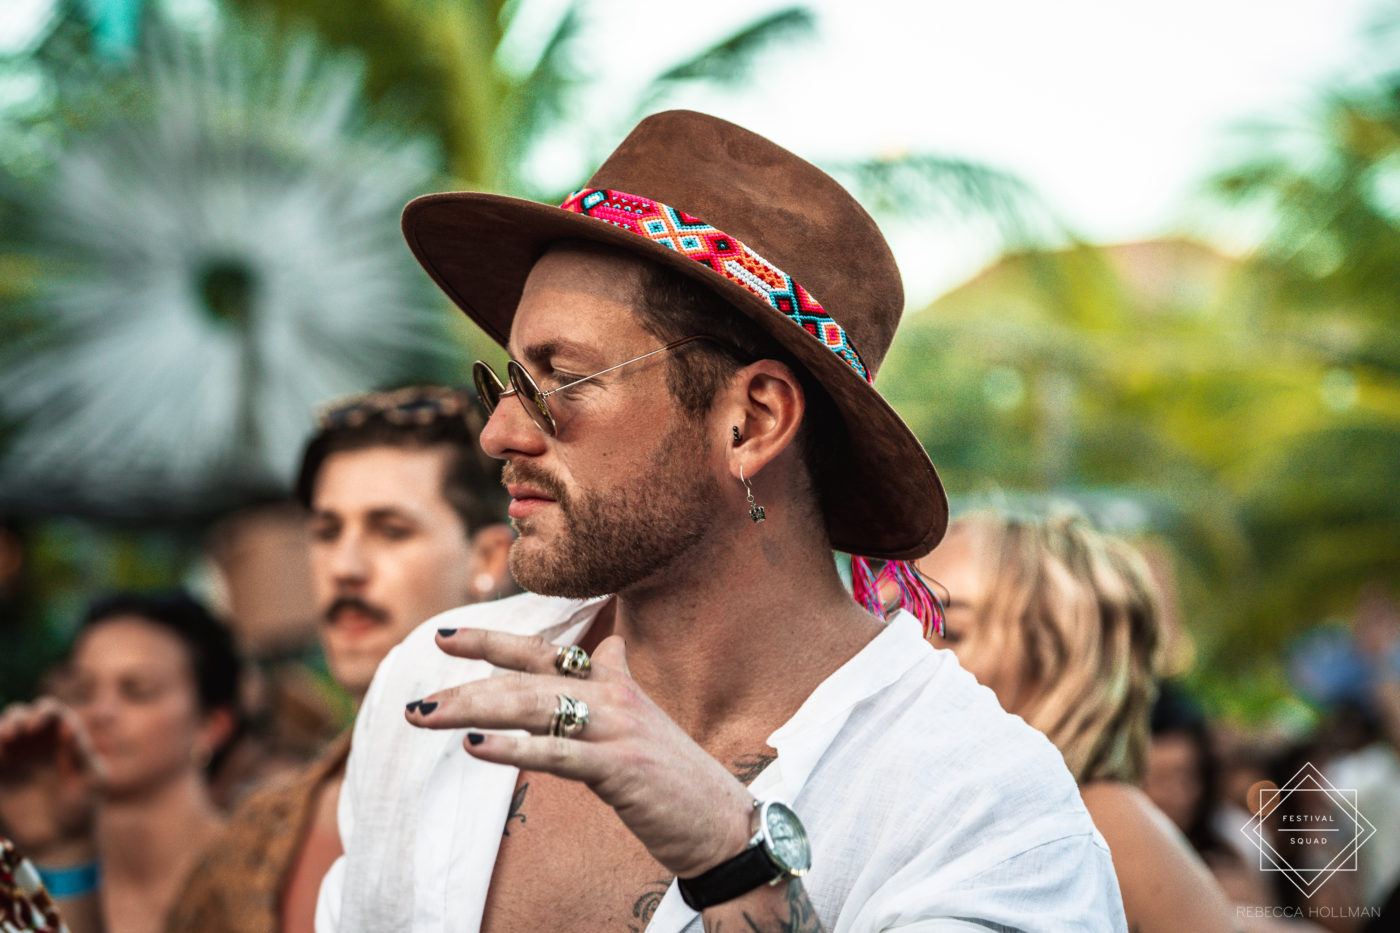 Afterlife returns to Tulum - Zamna Festival